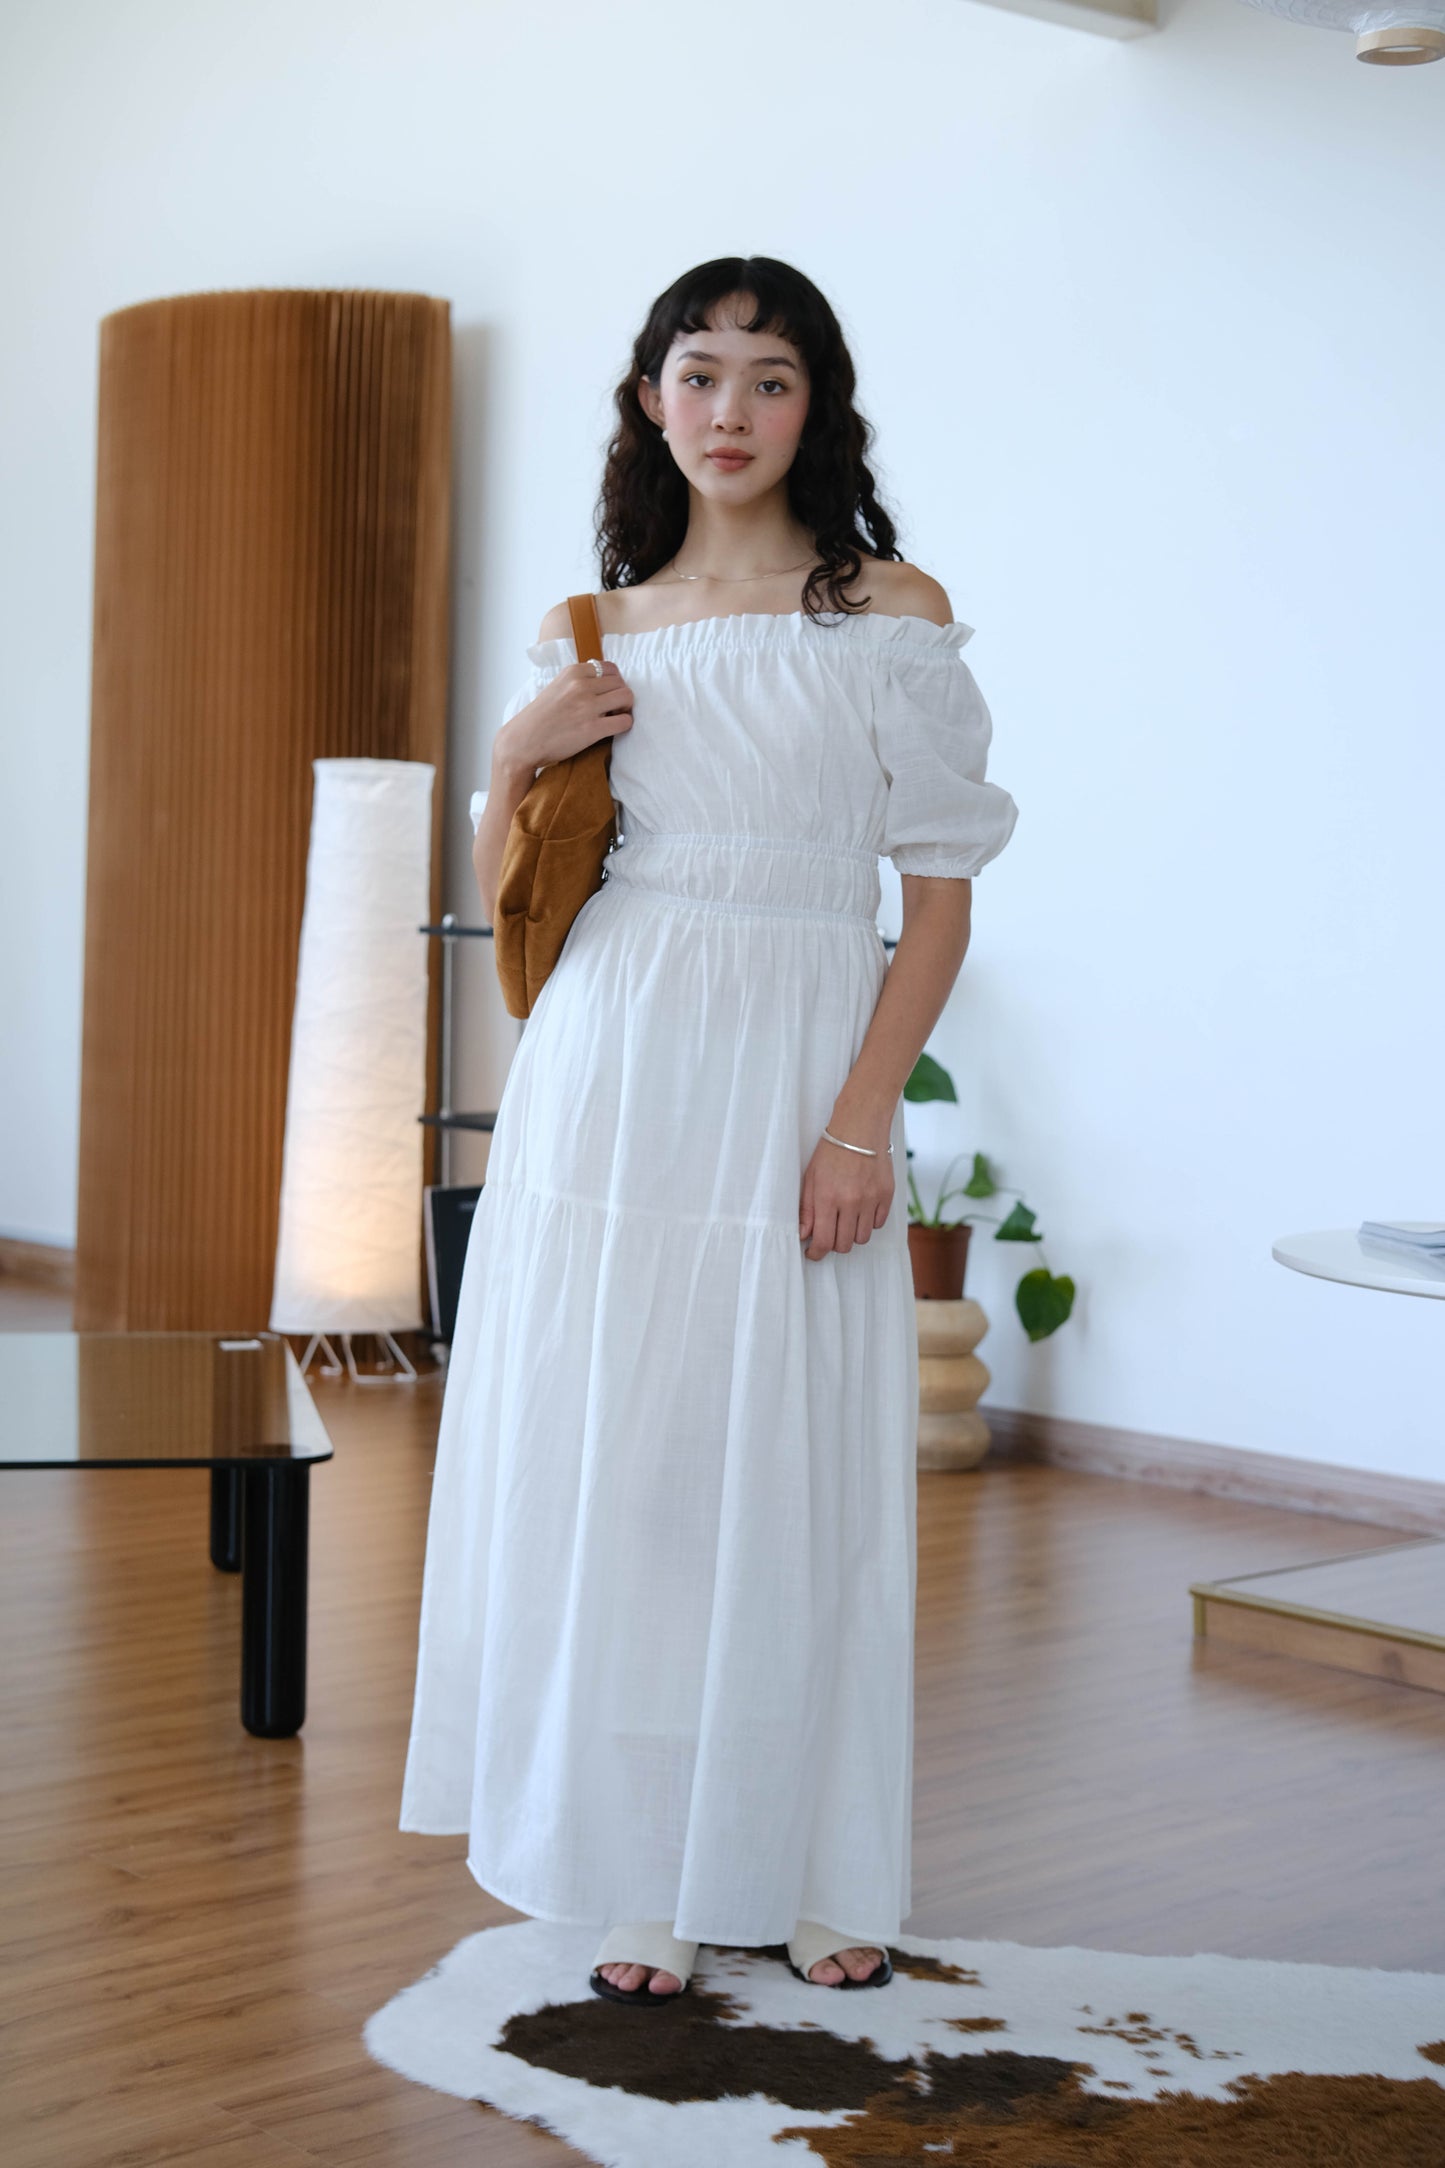 A-line skirt in snow white